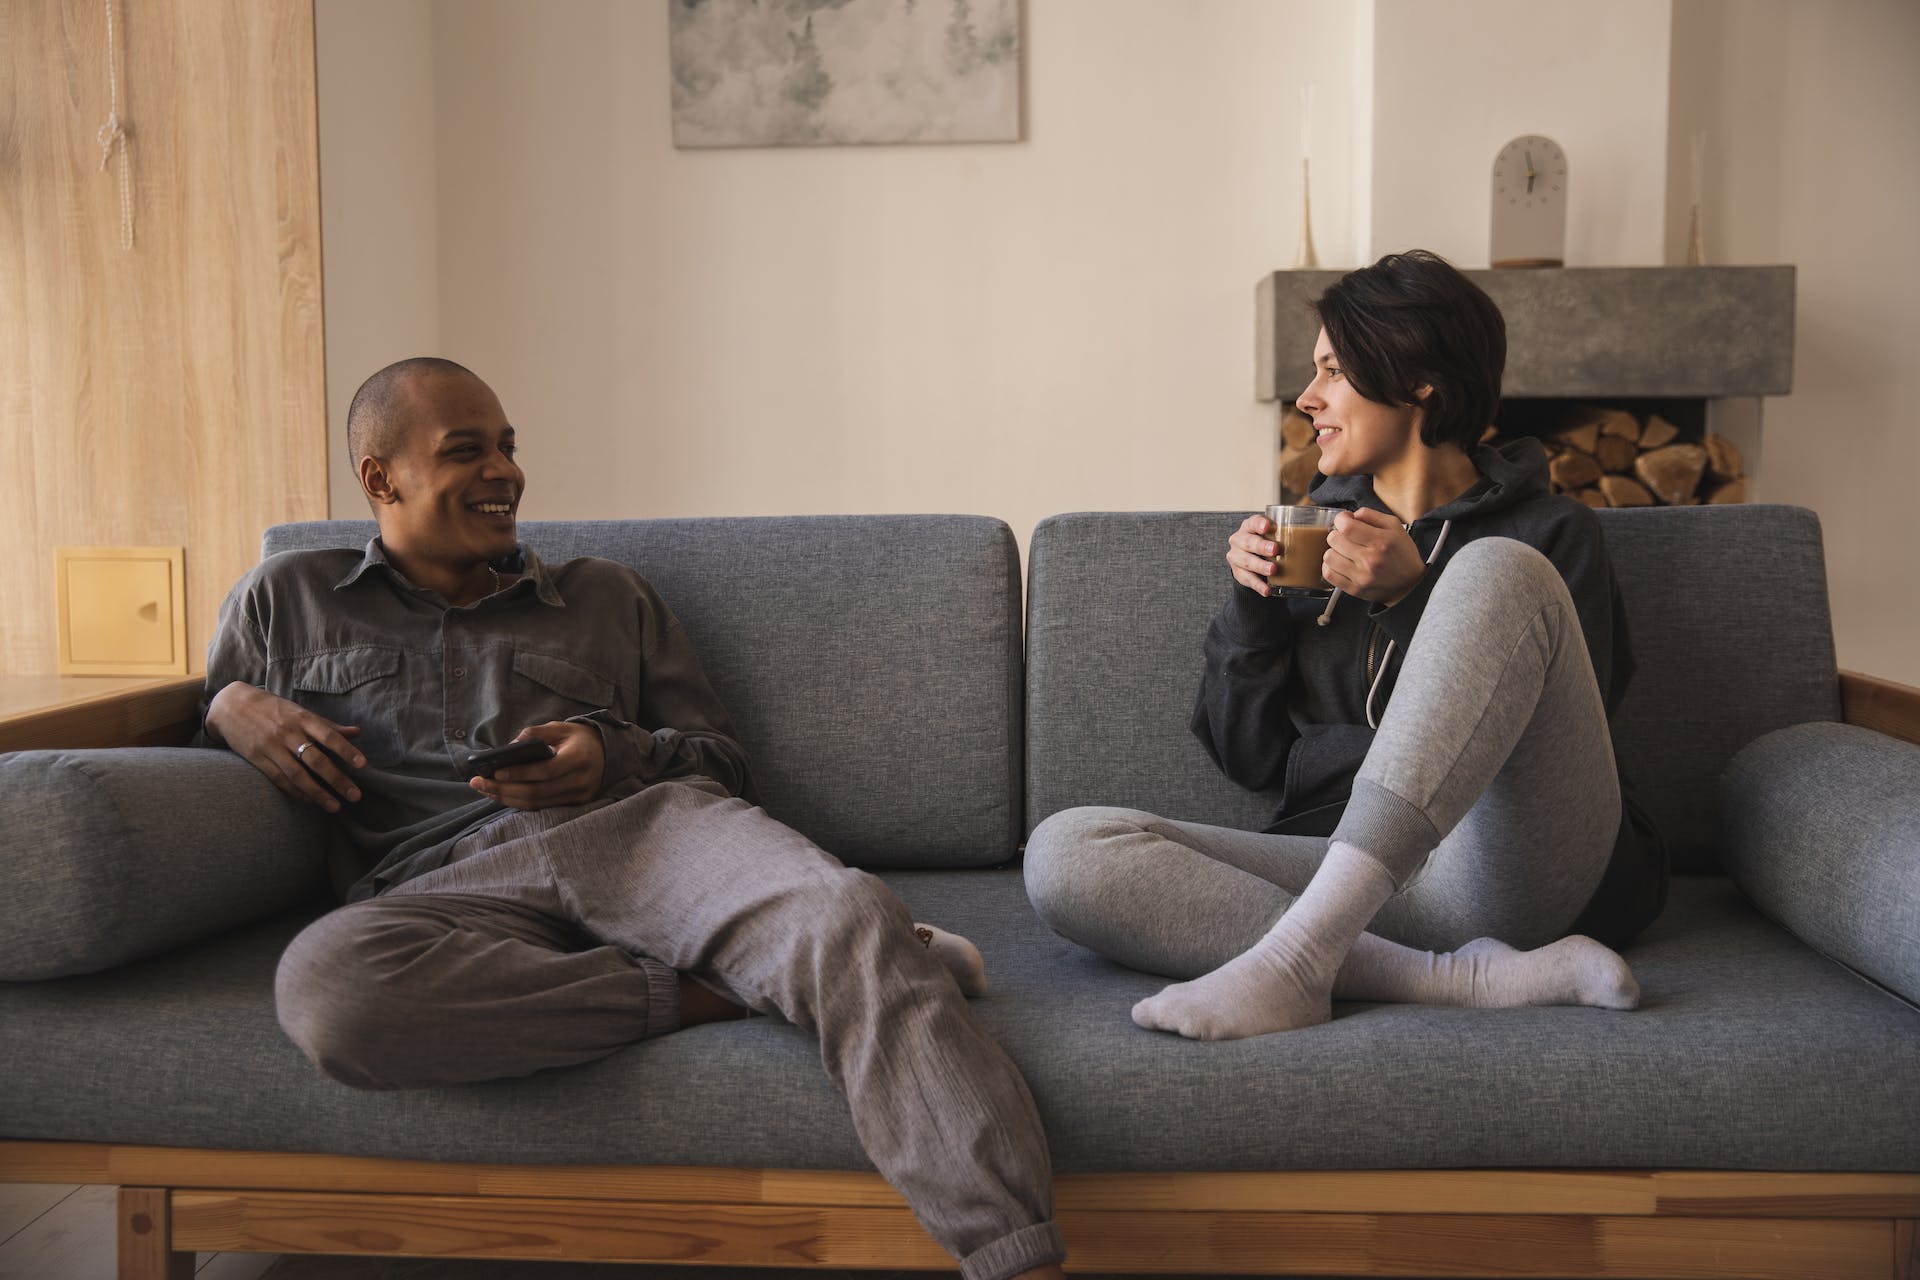 A couple sitting on a couch | Source: Pexels